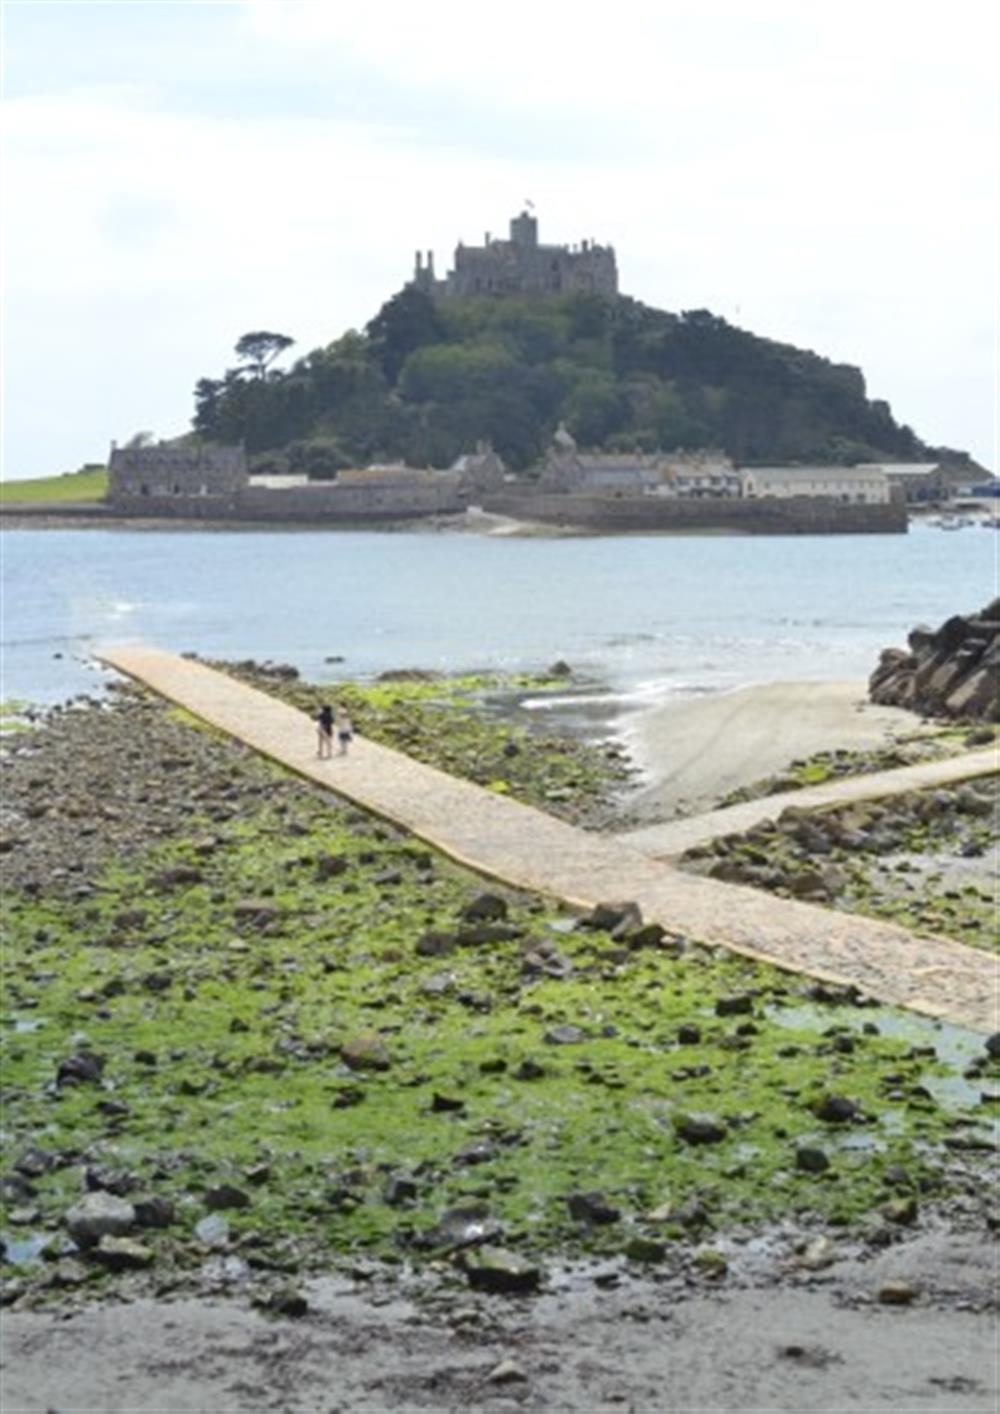 St Michael's Mount is 45 minutes' away - cross the causeway by foot or catch the water-taxi across to the island at Halliards in Helford Passage